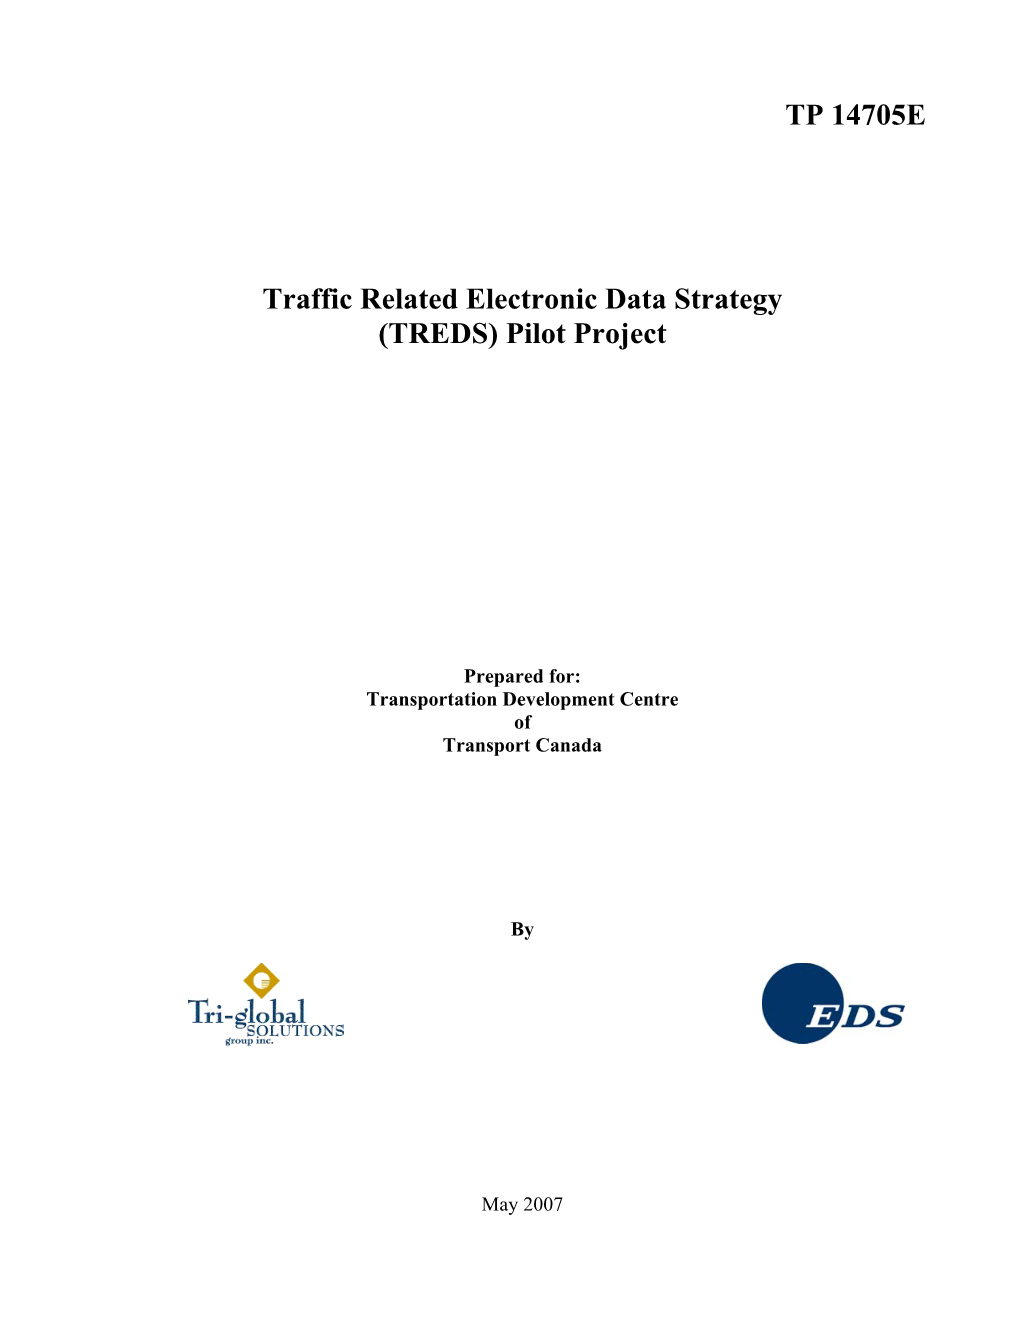 TP 14705E Traffic Related Electronic Data Strategy (TREDS) Pilot Project